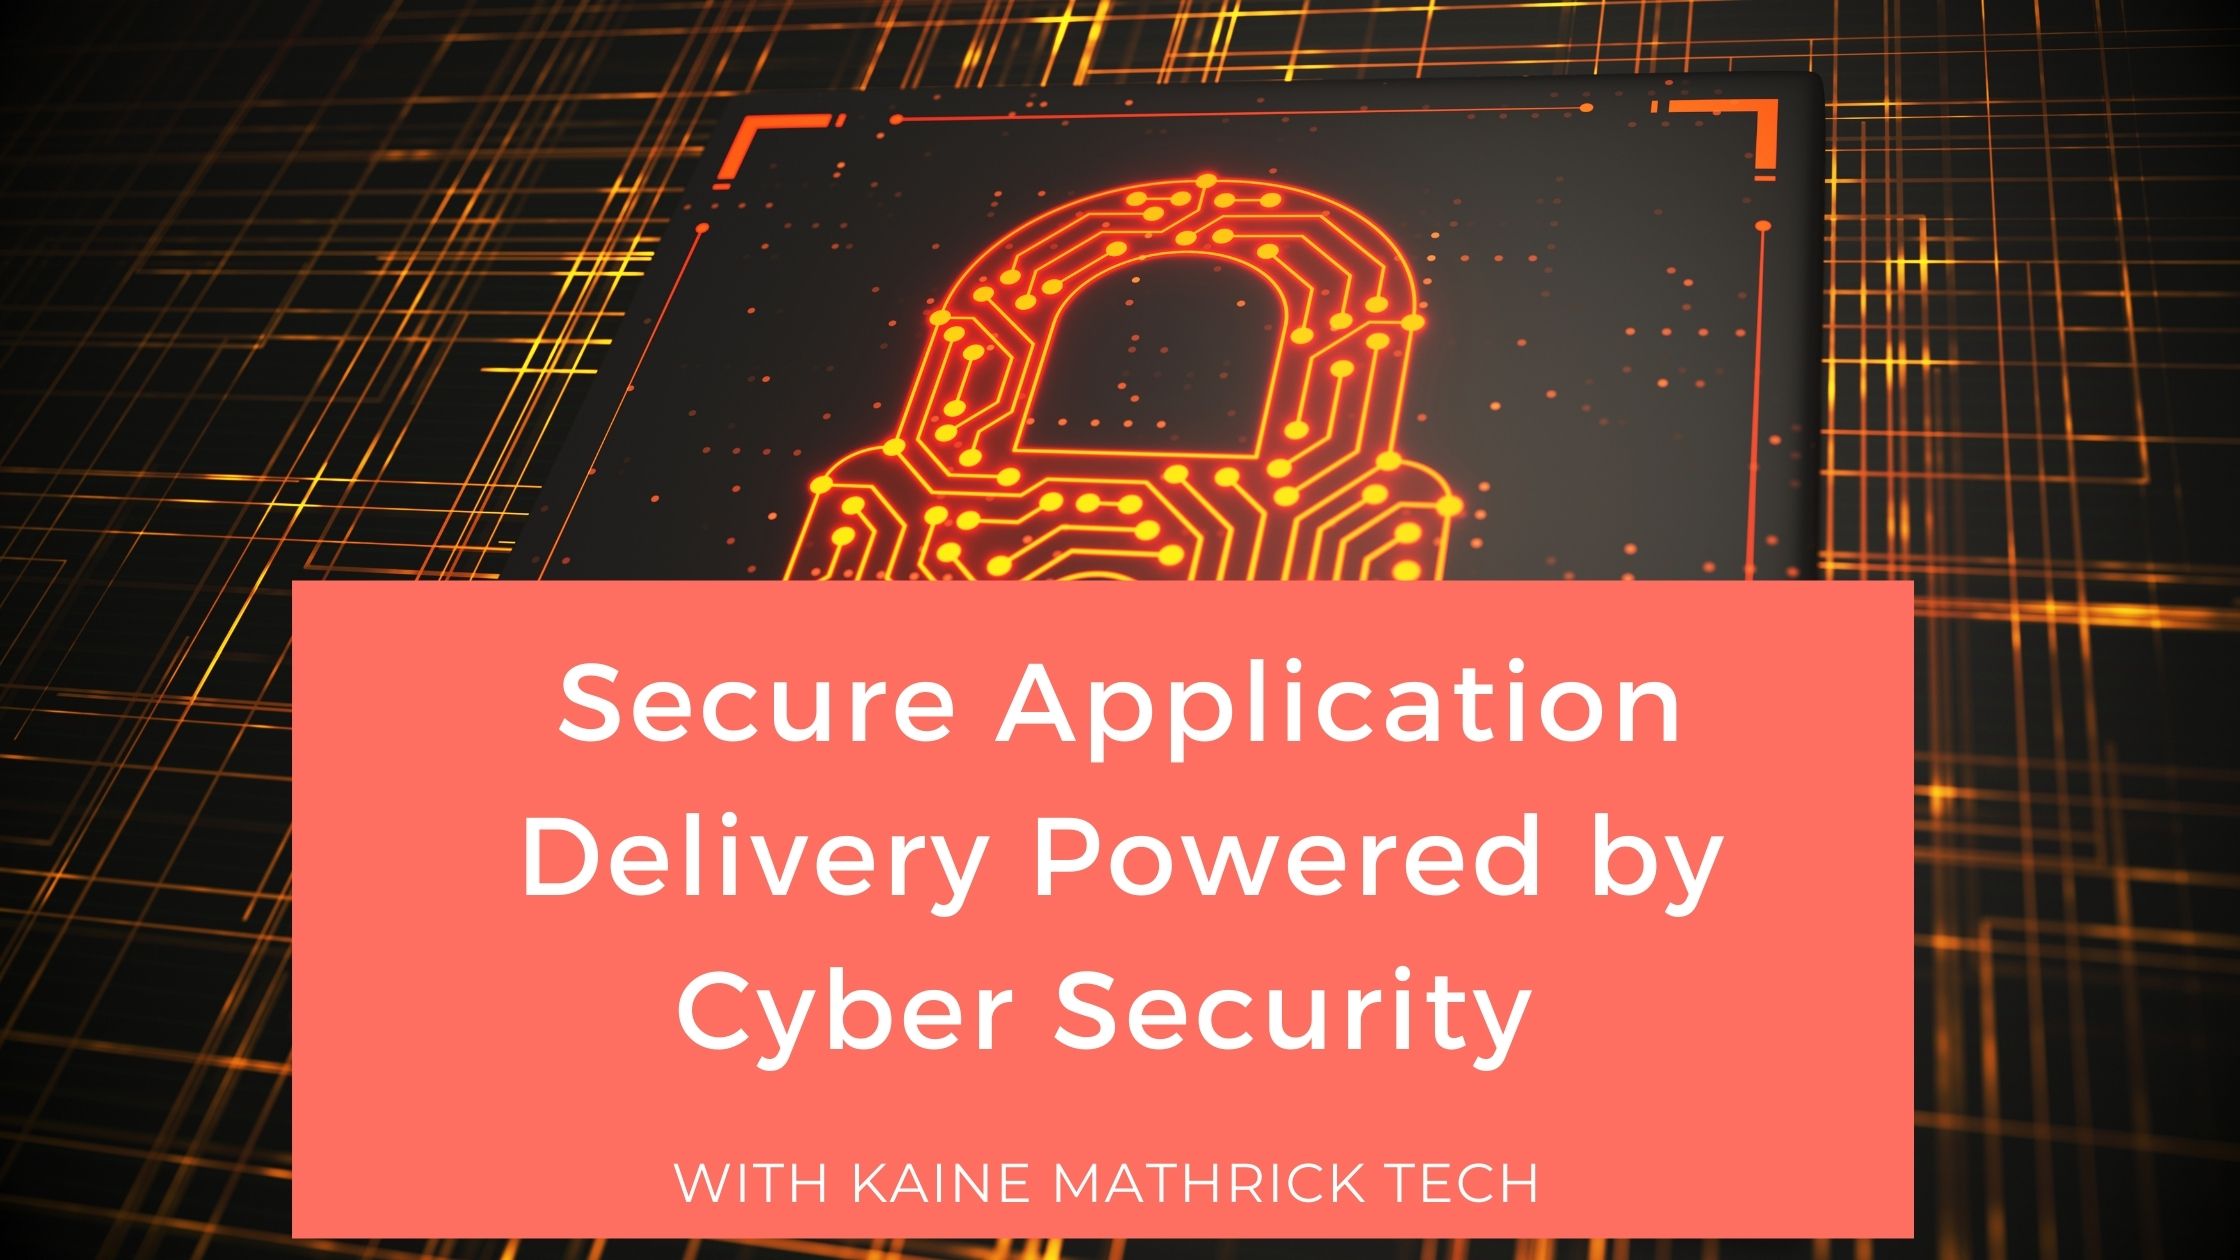 Secure Application Delivery Powered by Cyber Security